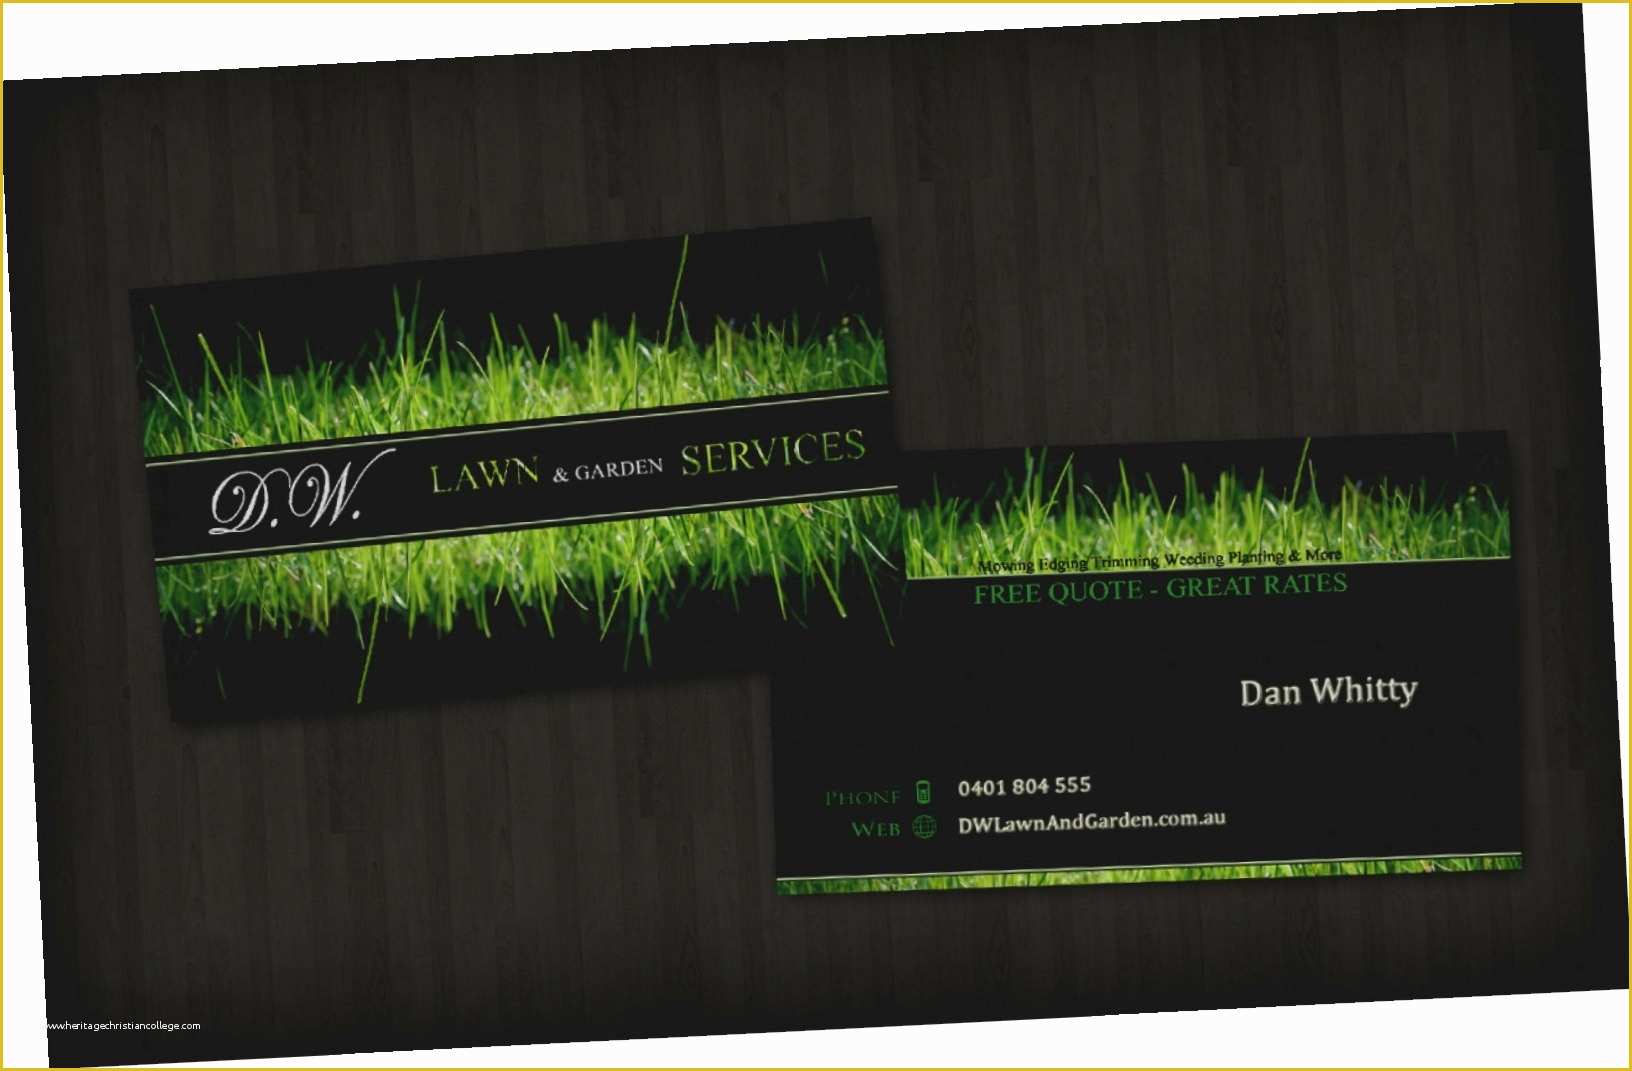 Lawn Care Business Card Templates Free Downloads Of Lawn Care Business Cards O9ch Lawn Care Business Cards